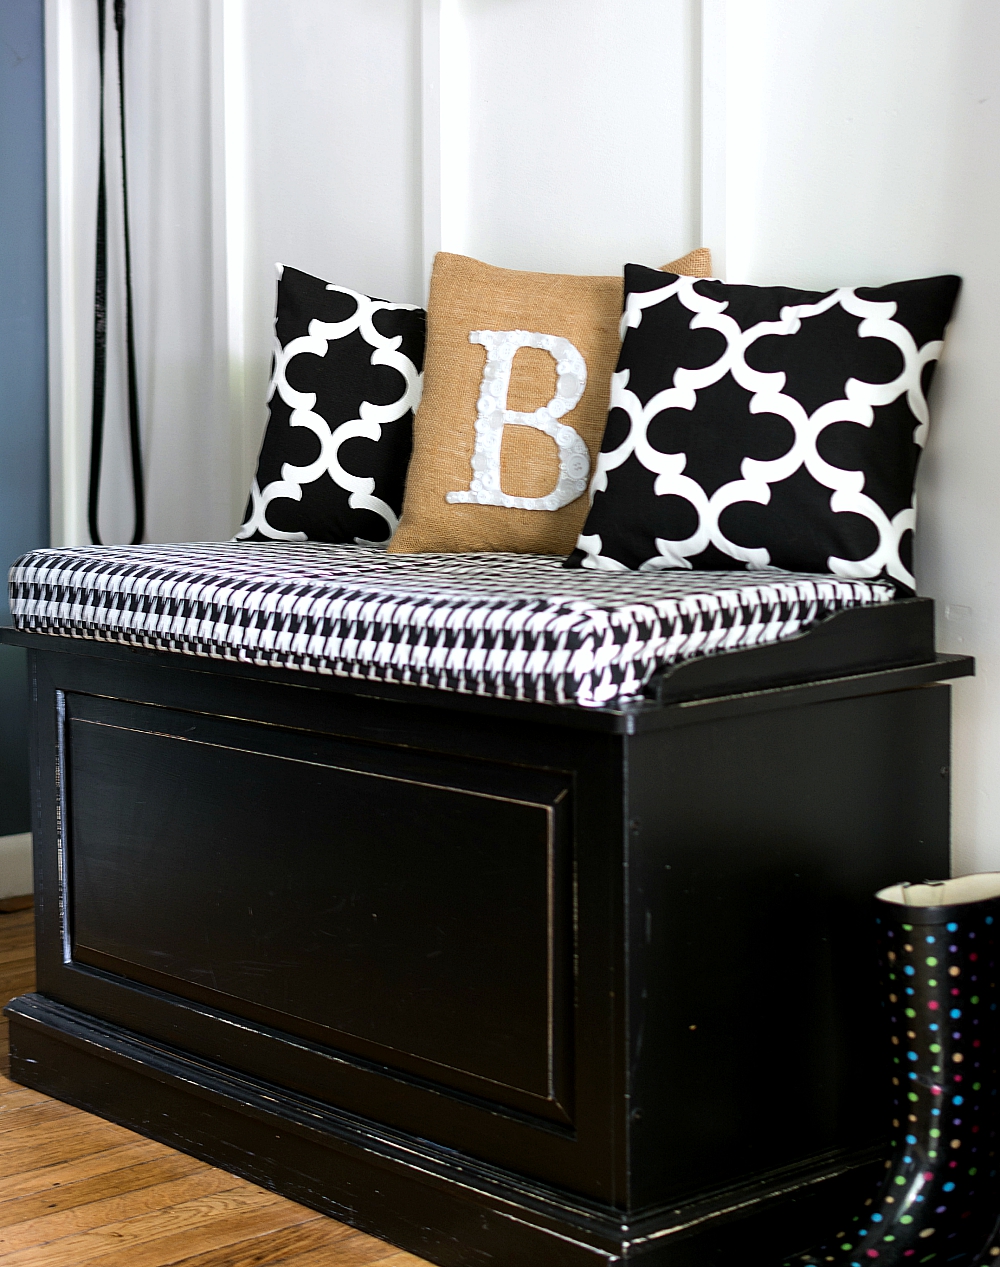 Black Bench with Houndstooth Black & White Fabric and pillows